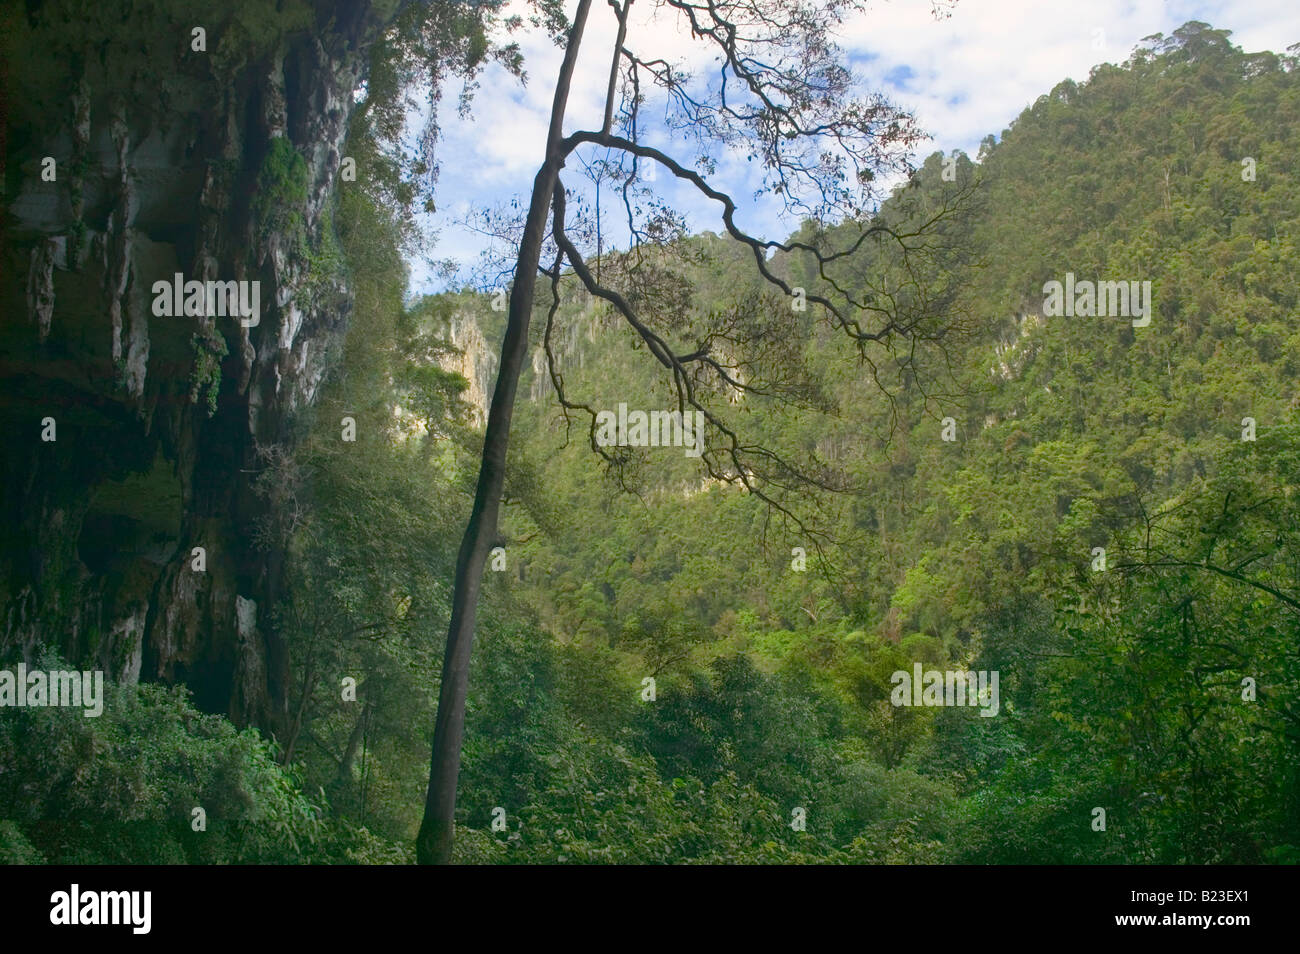 A view of Gunung Subis from inside the mouth of the Great Cave Niah Caves Niah National Park Sarawak Malaysia Stock Photo